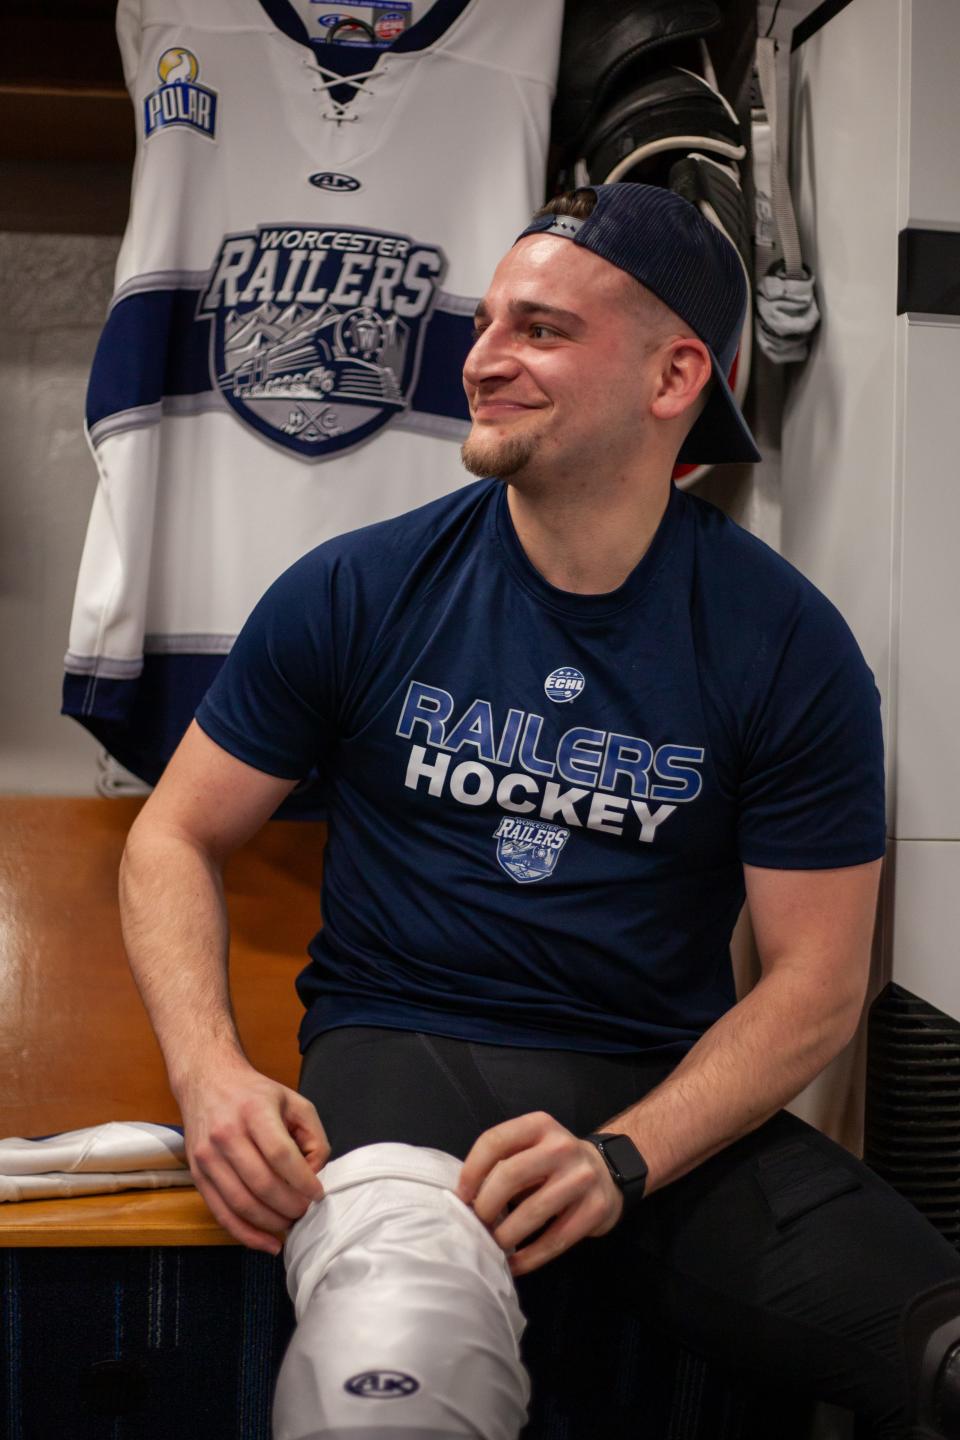 Worcester native Nick Pennucci enjoys a smile in the Railers locker room upon making his pro hockey debut last week.